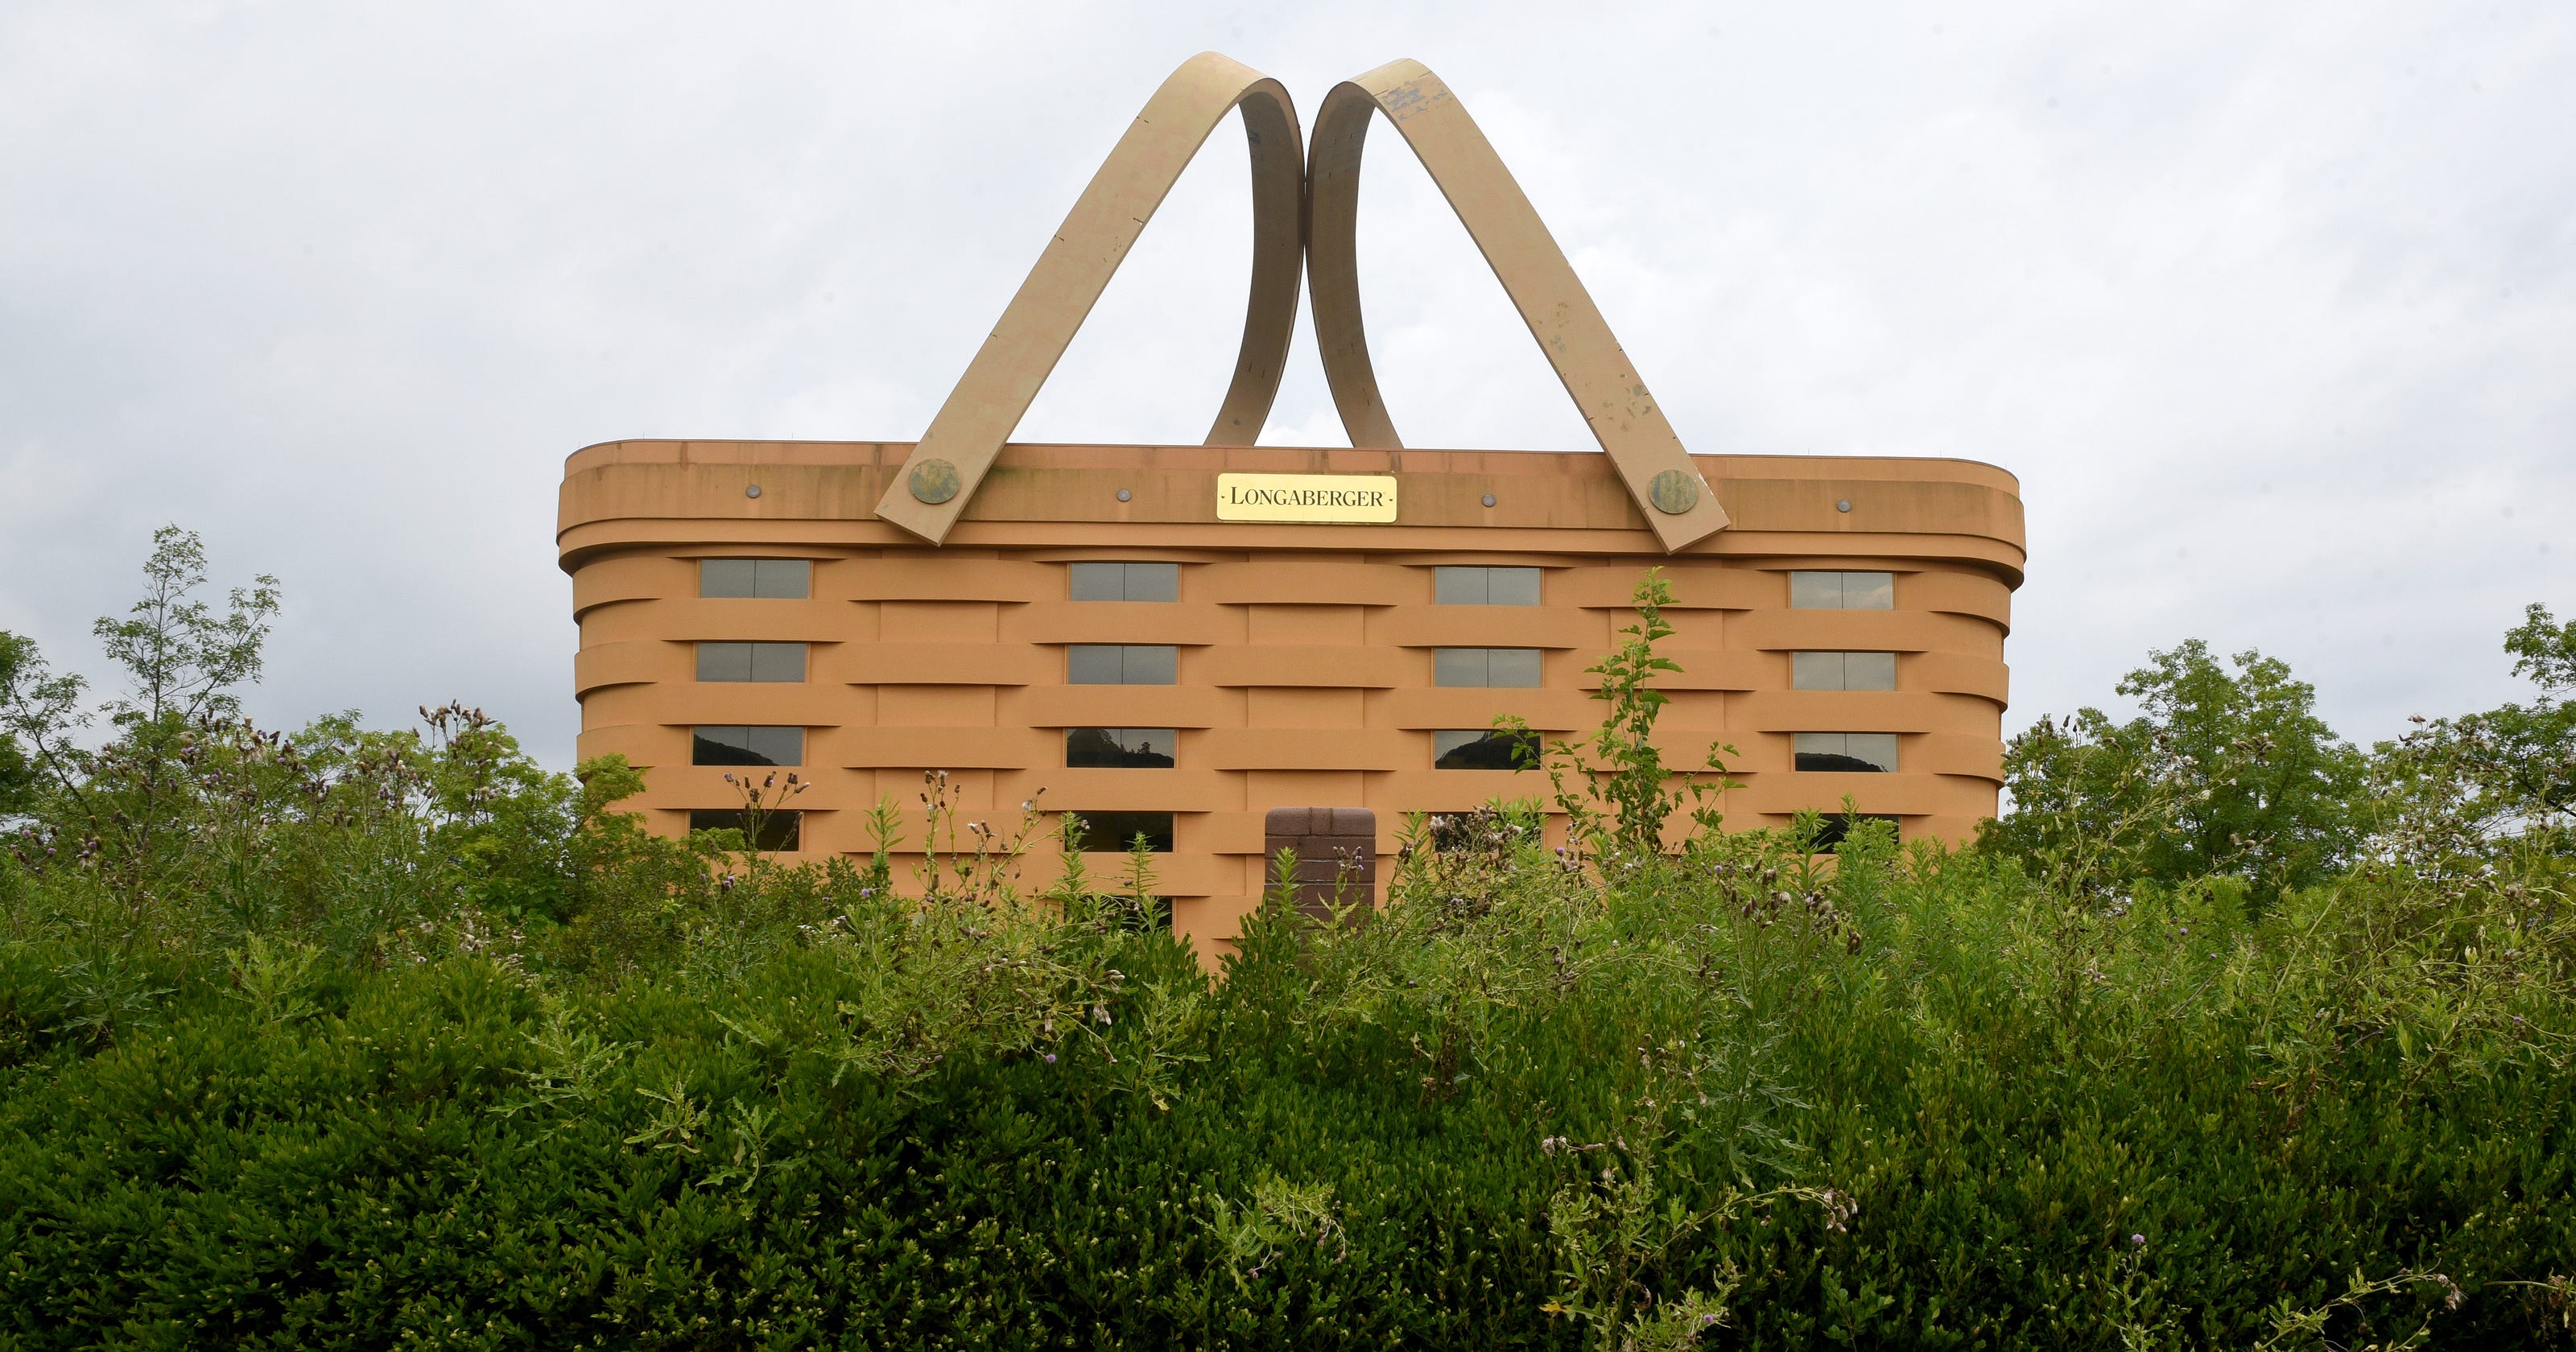 Longaberger basket might sell for $1.65 million to Tennessee investor